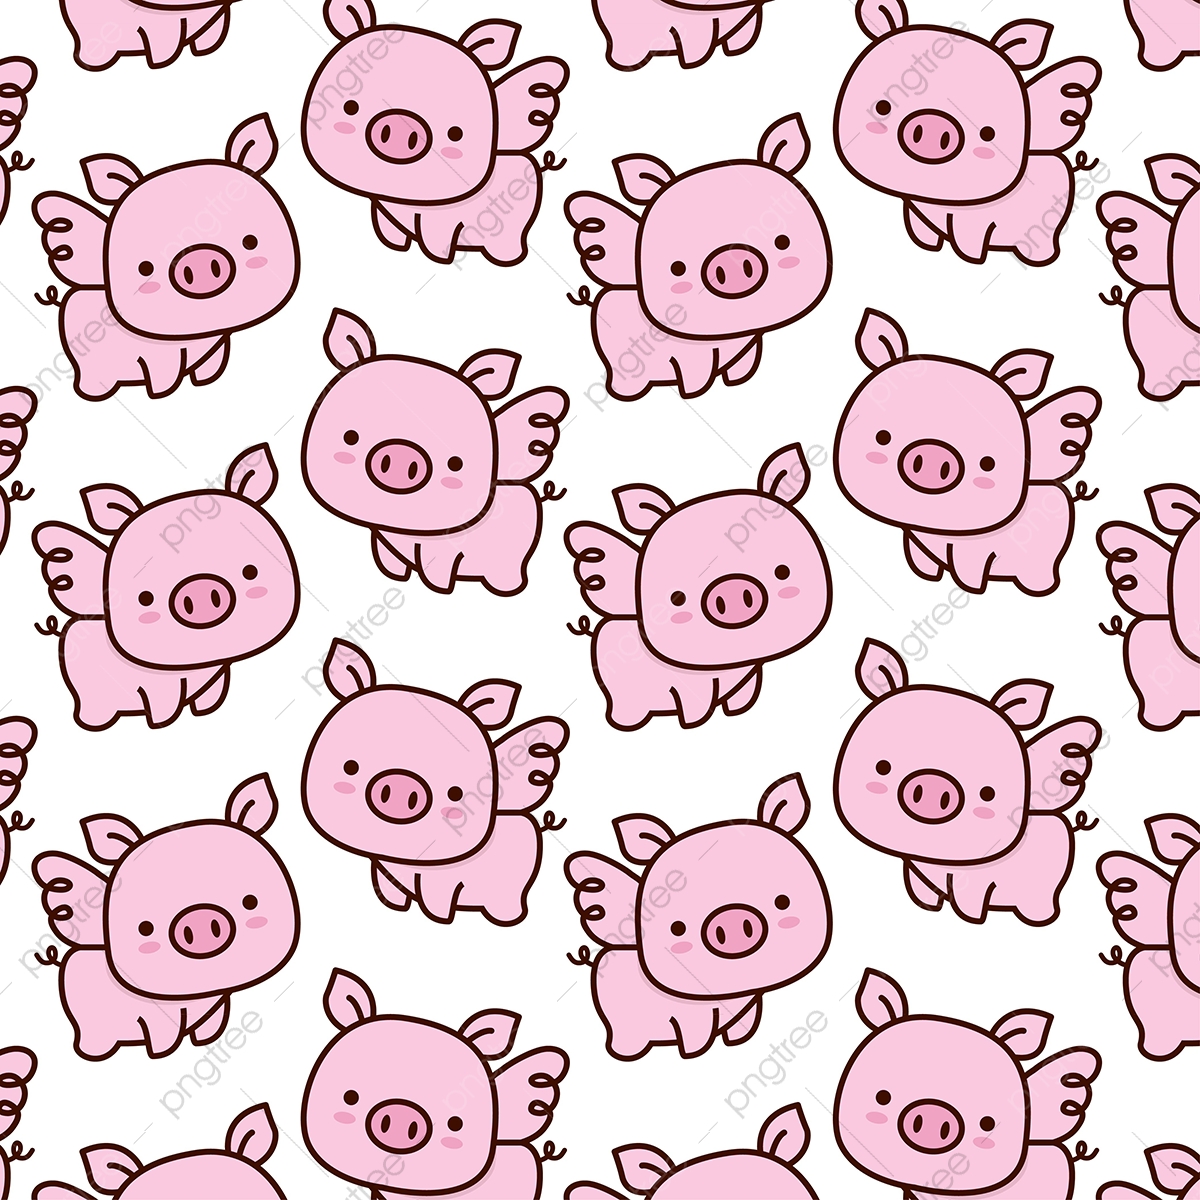 Adorable Baby Pigs Wallpapers